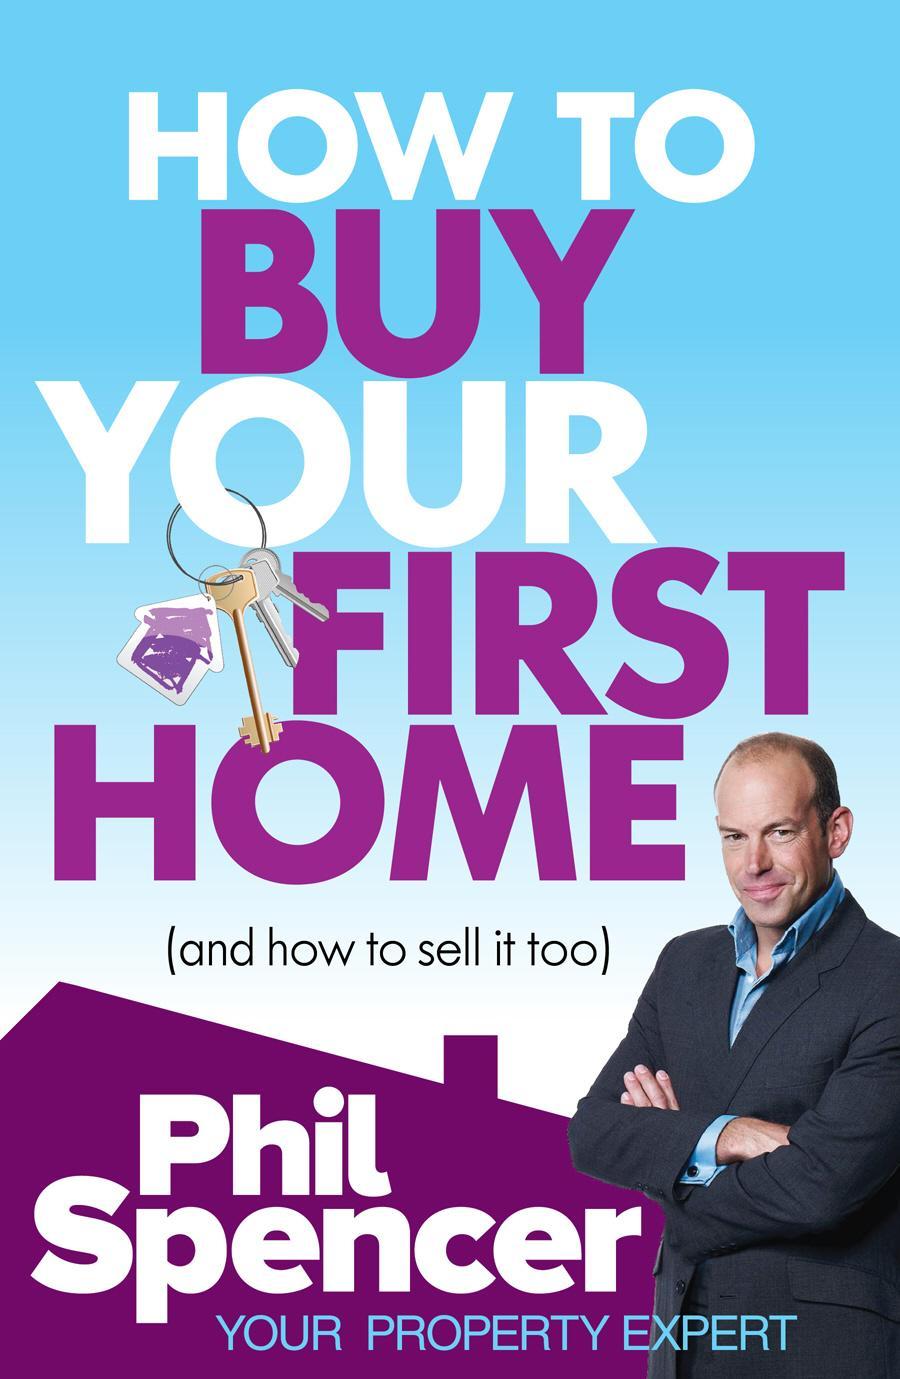 How to Buy Your First Home (And How to Sell it Too) - Phil Spencer